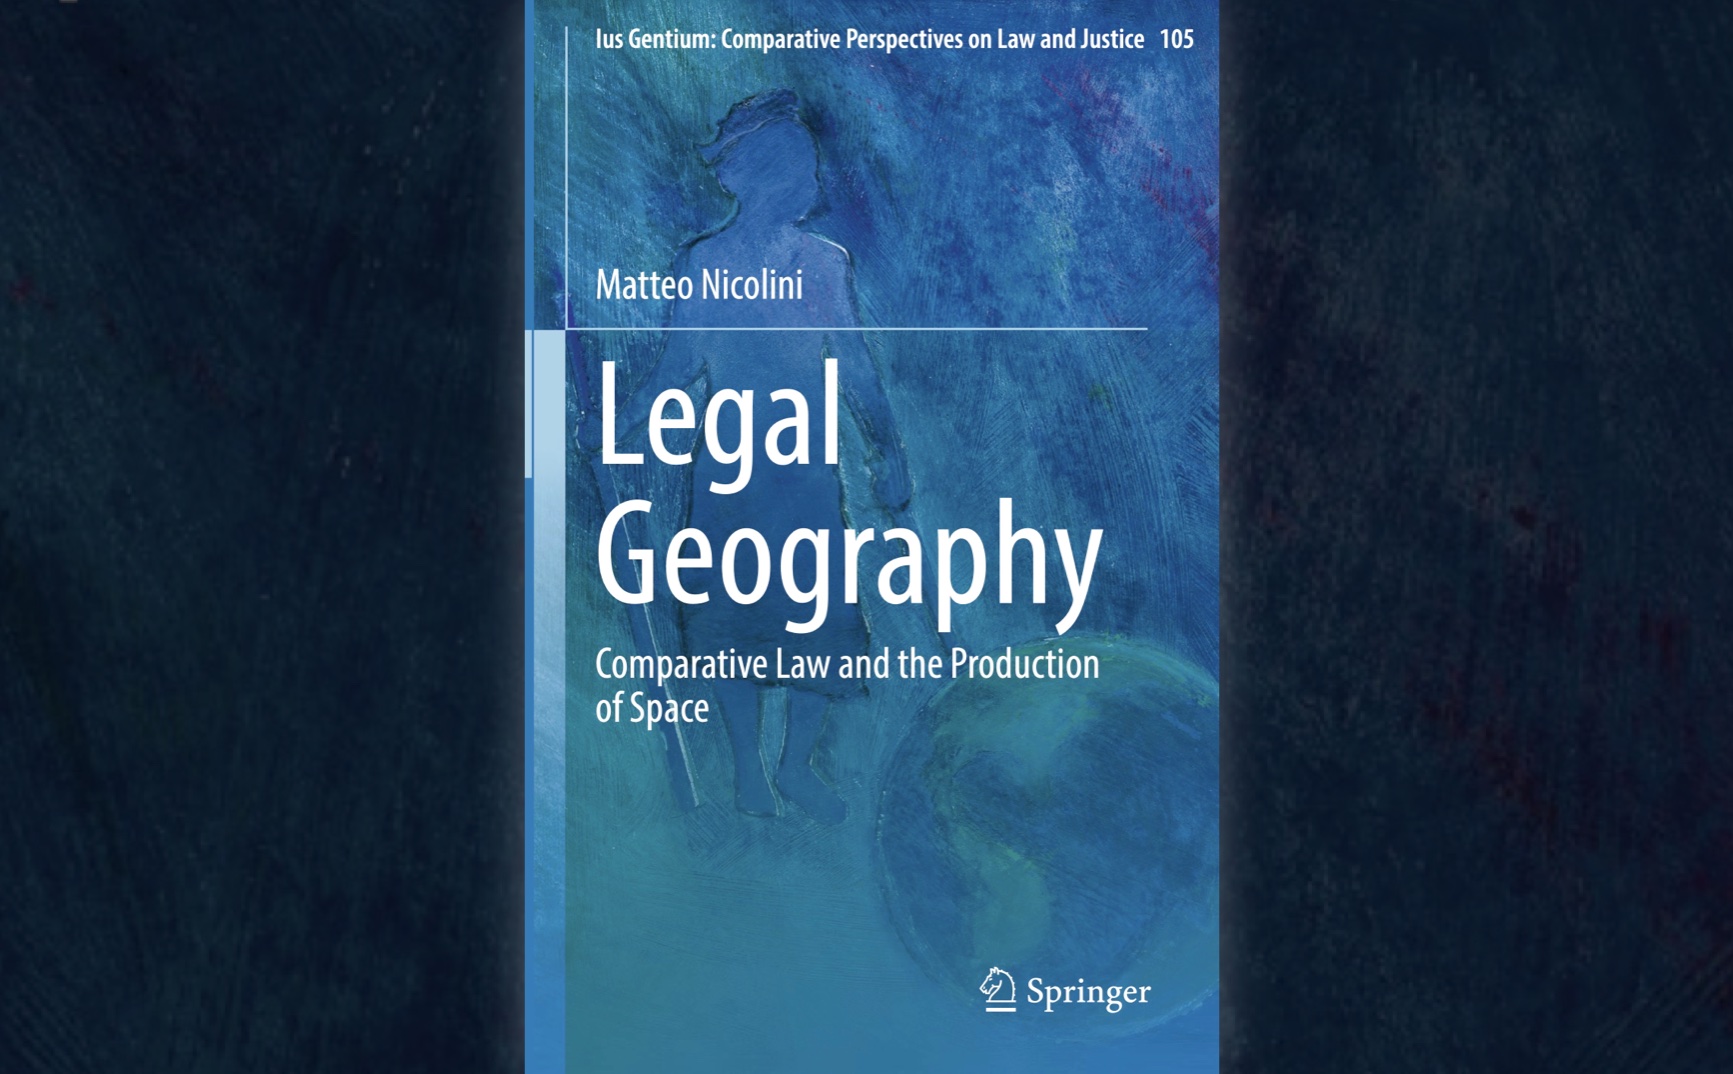 Review of “Legal Geography-Comparative Law and the Production of Space” by Matteo Nicolini